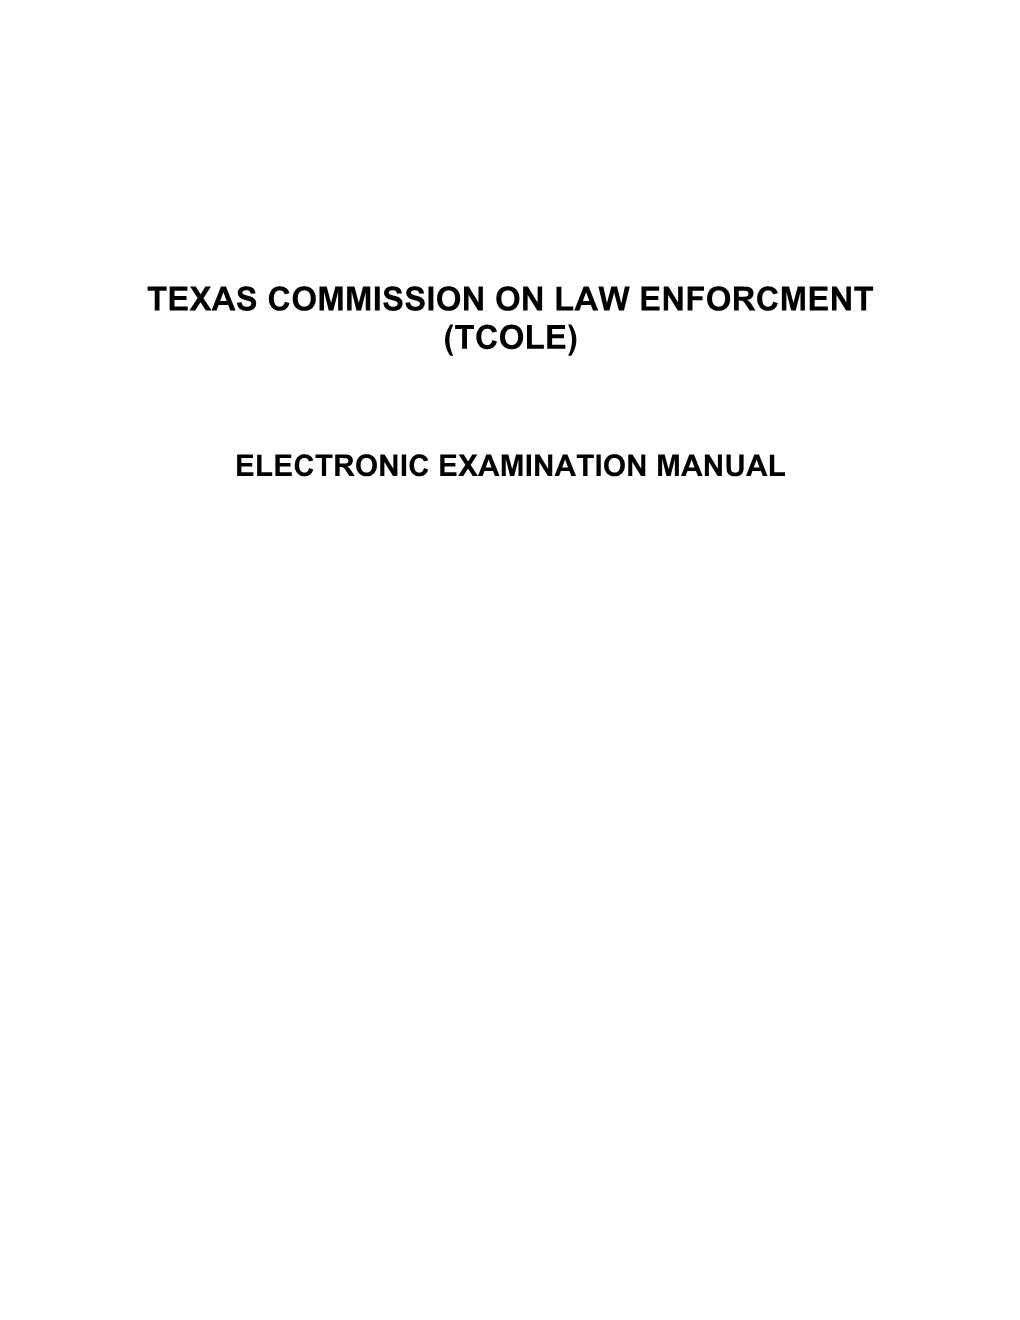 Texas Commission on Law Enforcment